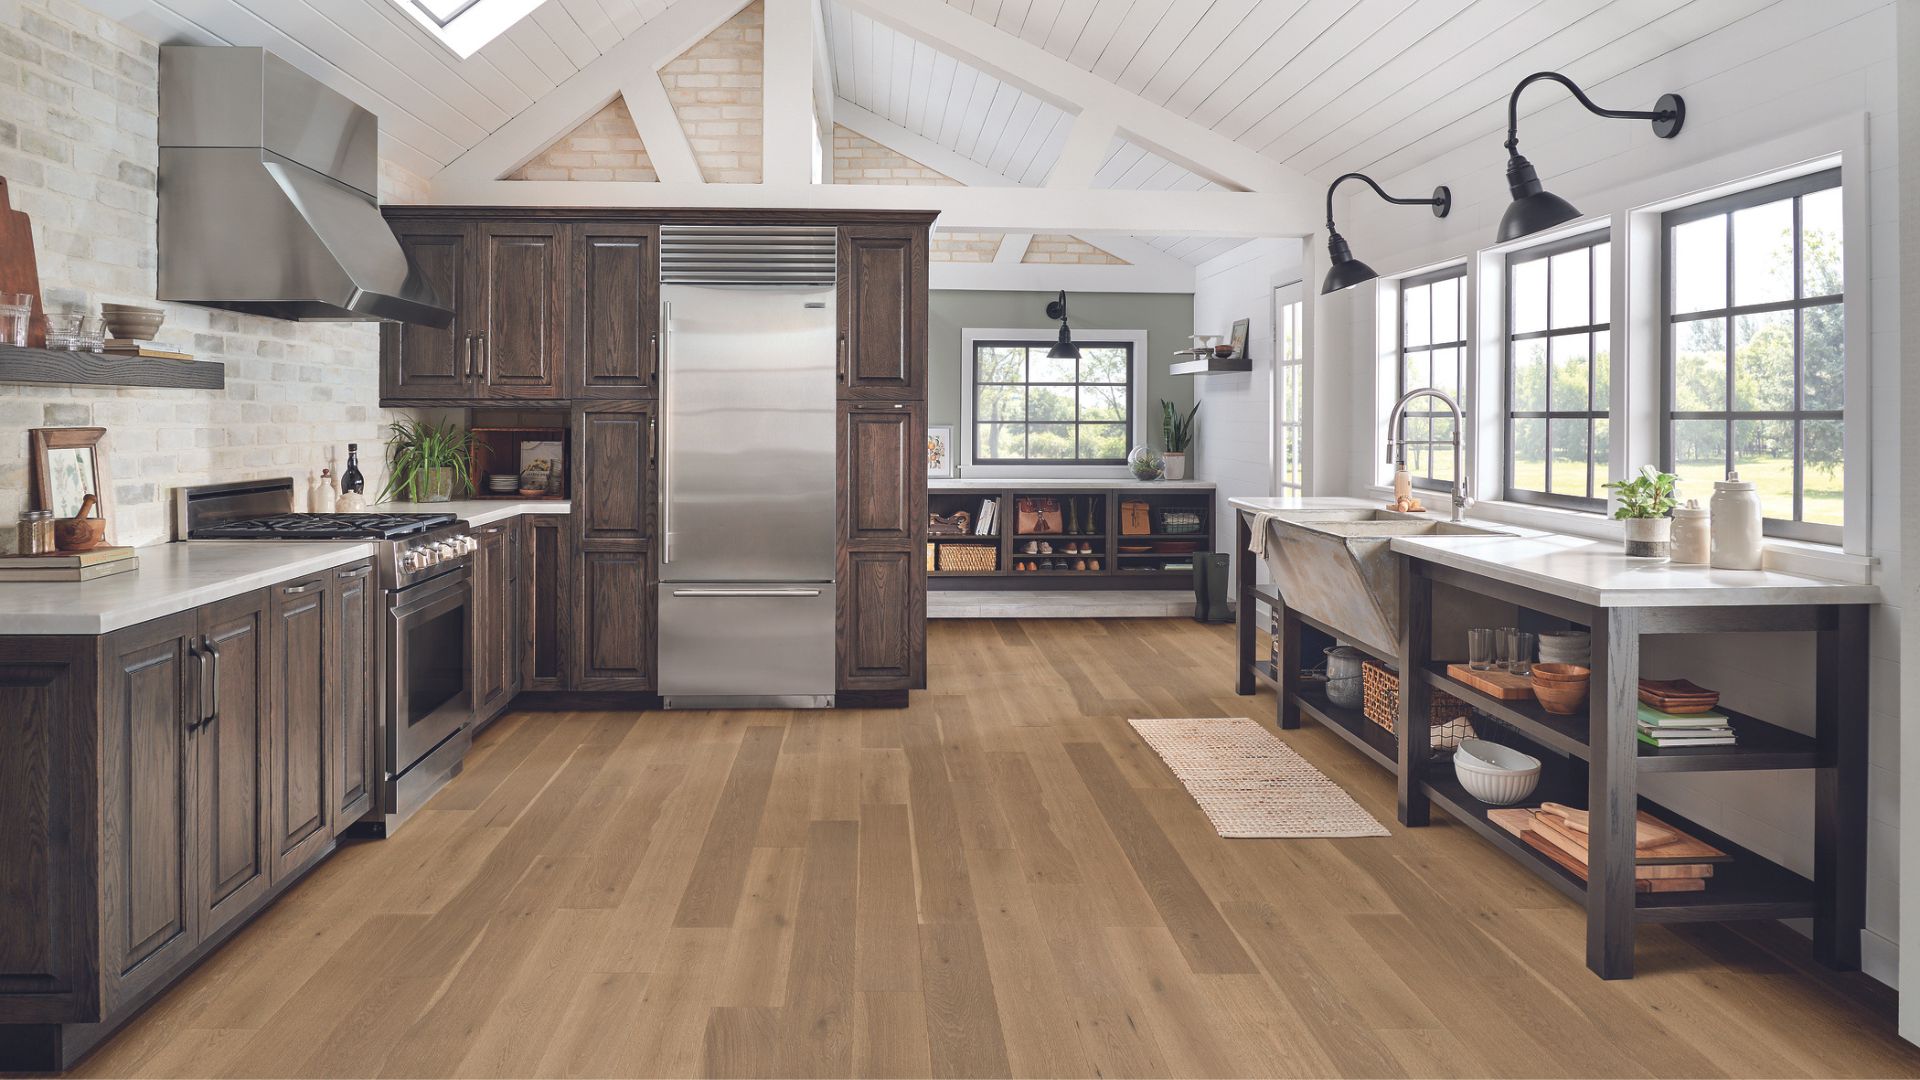 Laminate wood flooring in a rustic kitchen.